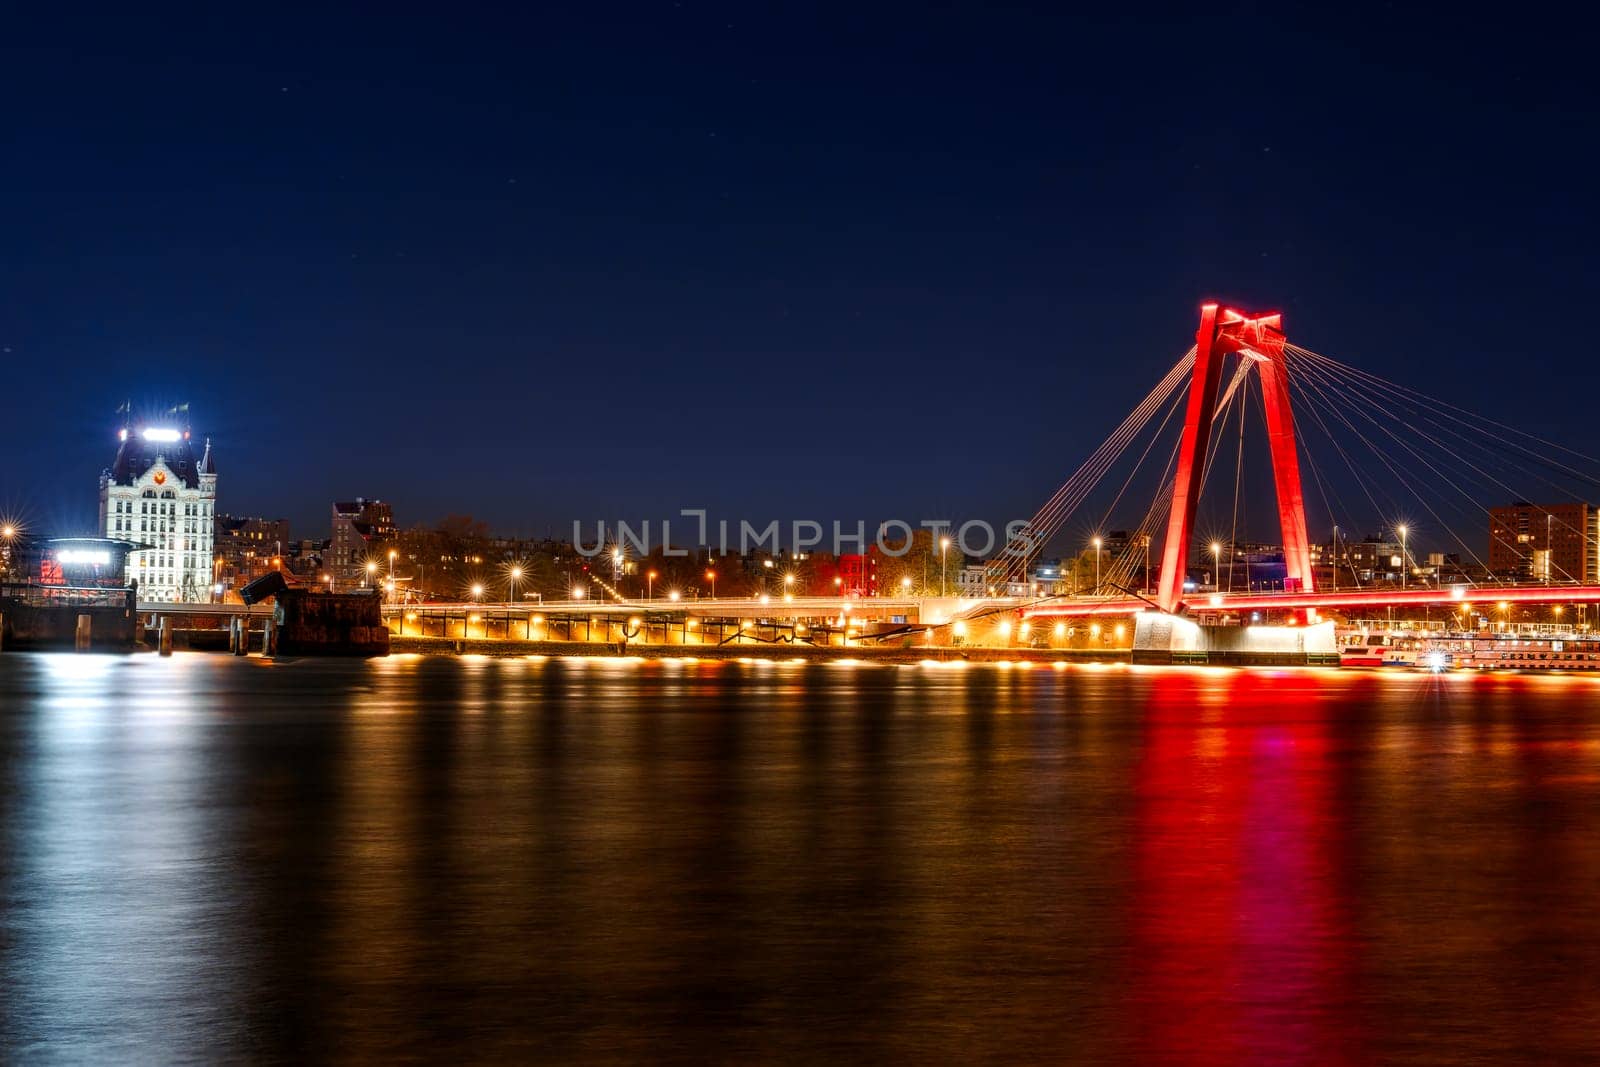 Capture the breathtaking beauty of Willemsbrug bridge in Rotterdam with this stunning long exposure night photo. The colorful lights reflecting on the water add a magical touch to the urban landscape.